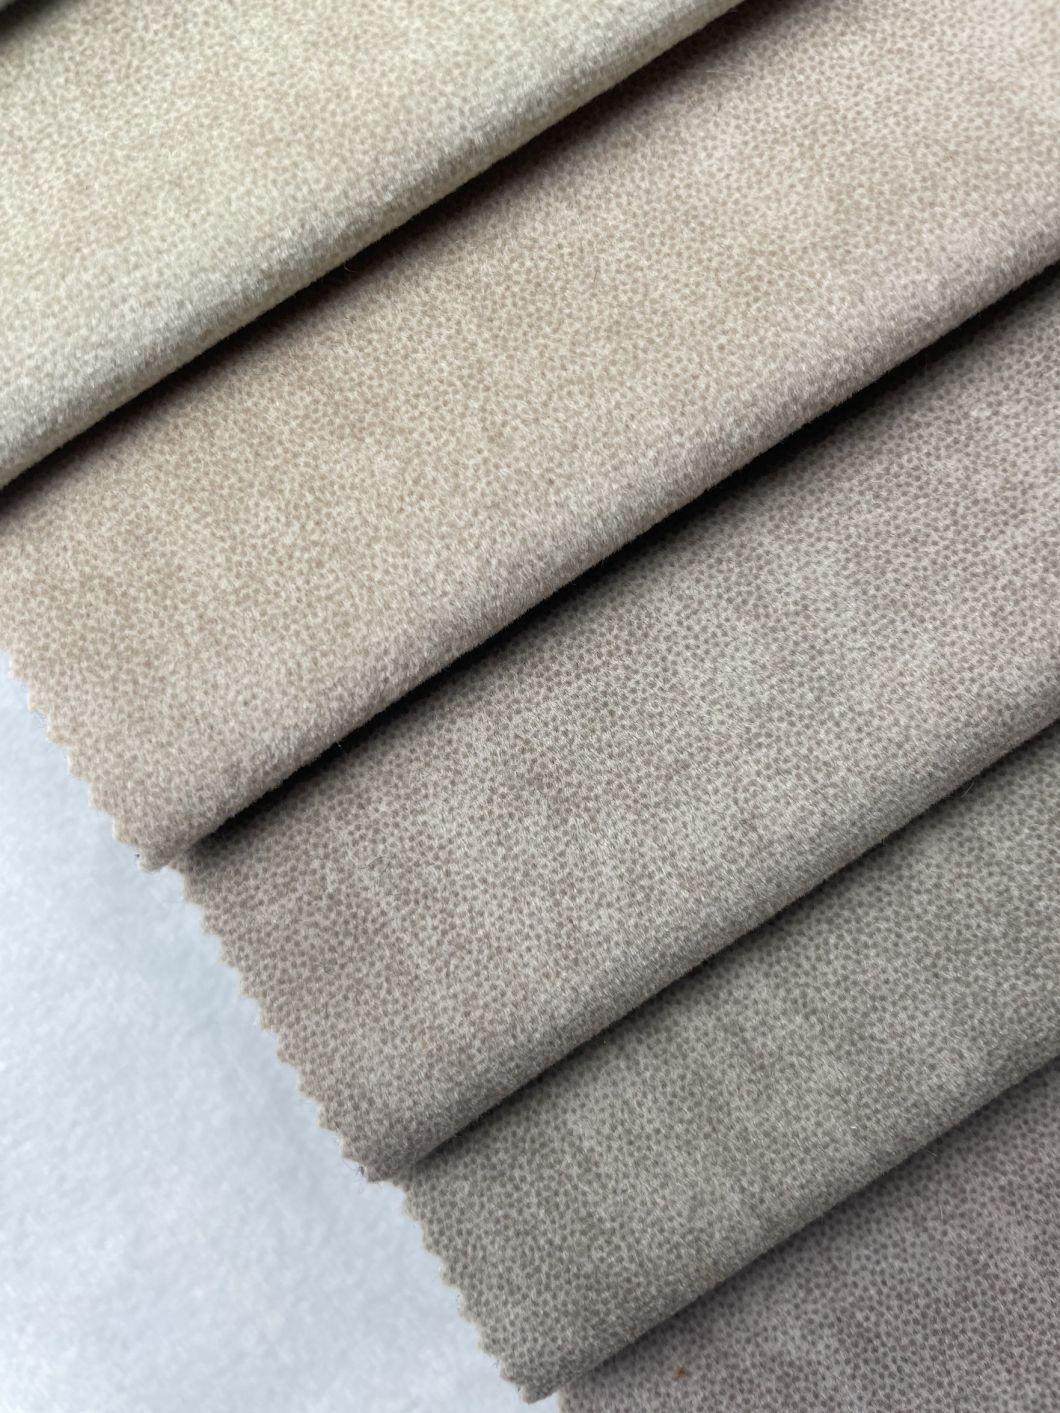 China Hot Selling Good Quality Wholesale Most Popular Sofa/Chair Fabric, Upholstery Fabric for Home Textile High Performance Polyester Super Soft Fabric